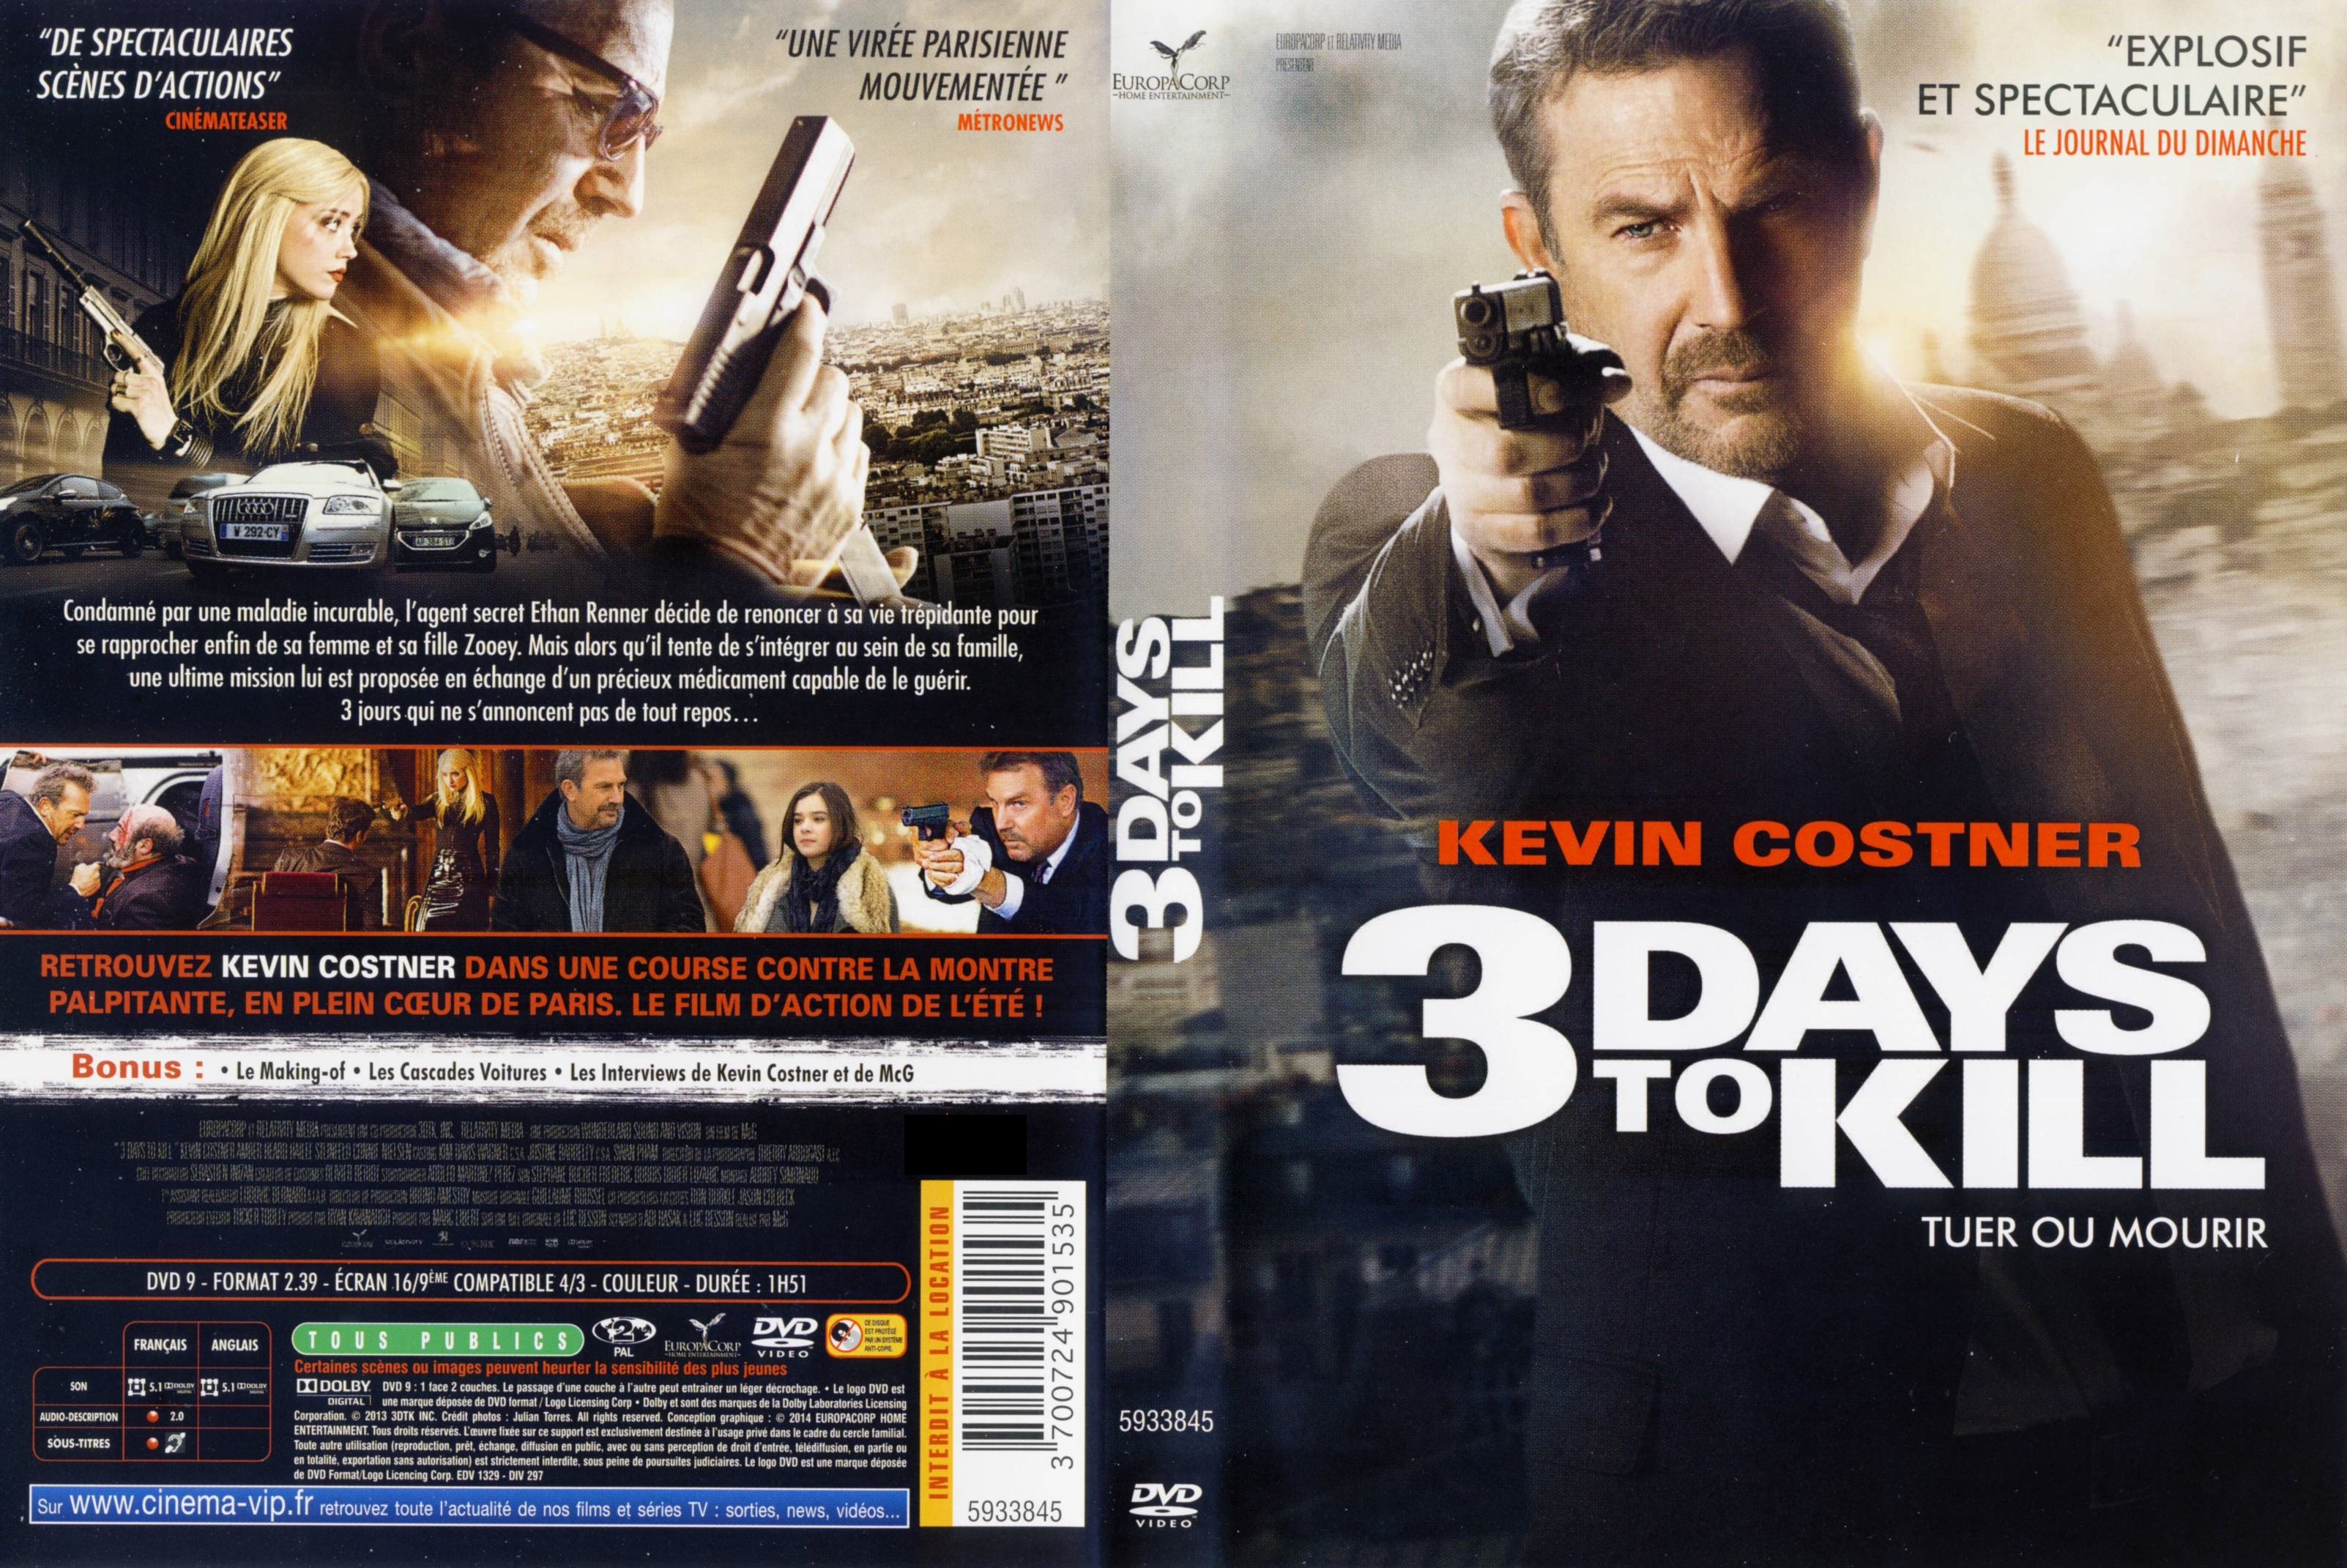 Jaquette DVD 3 Days to Kill